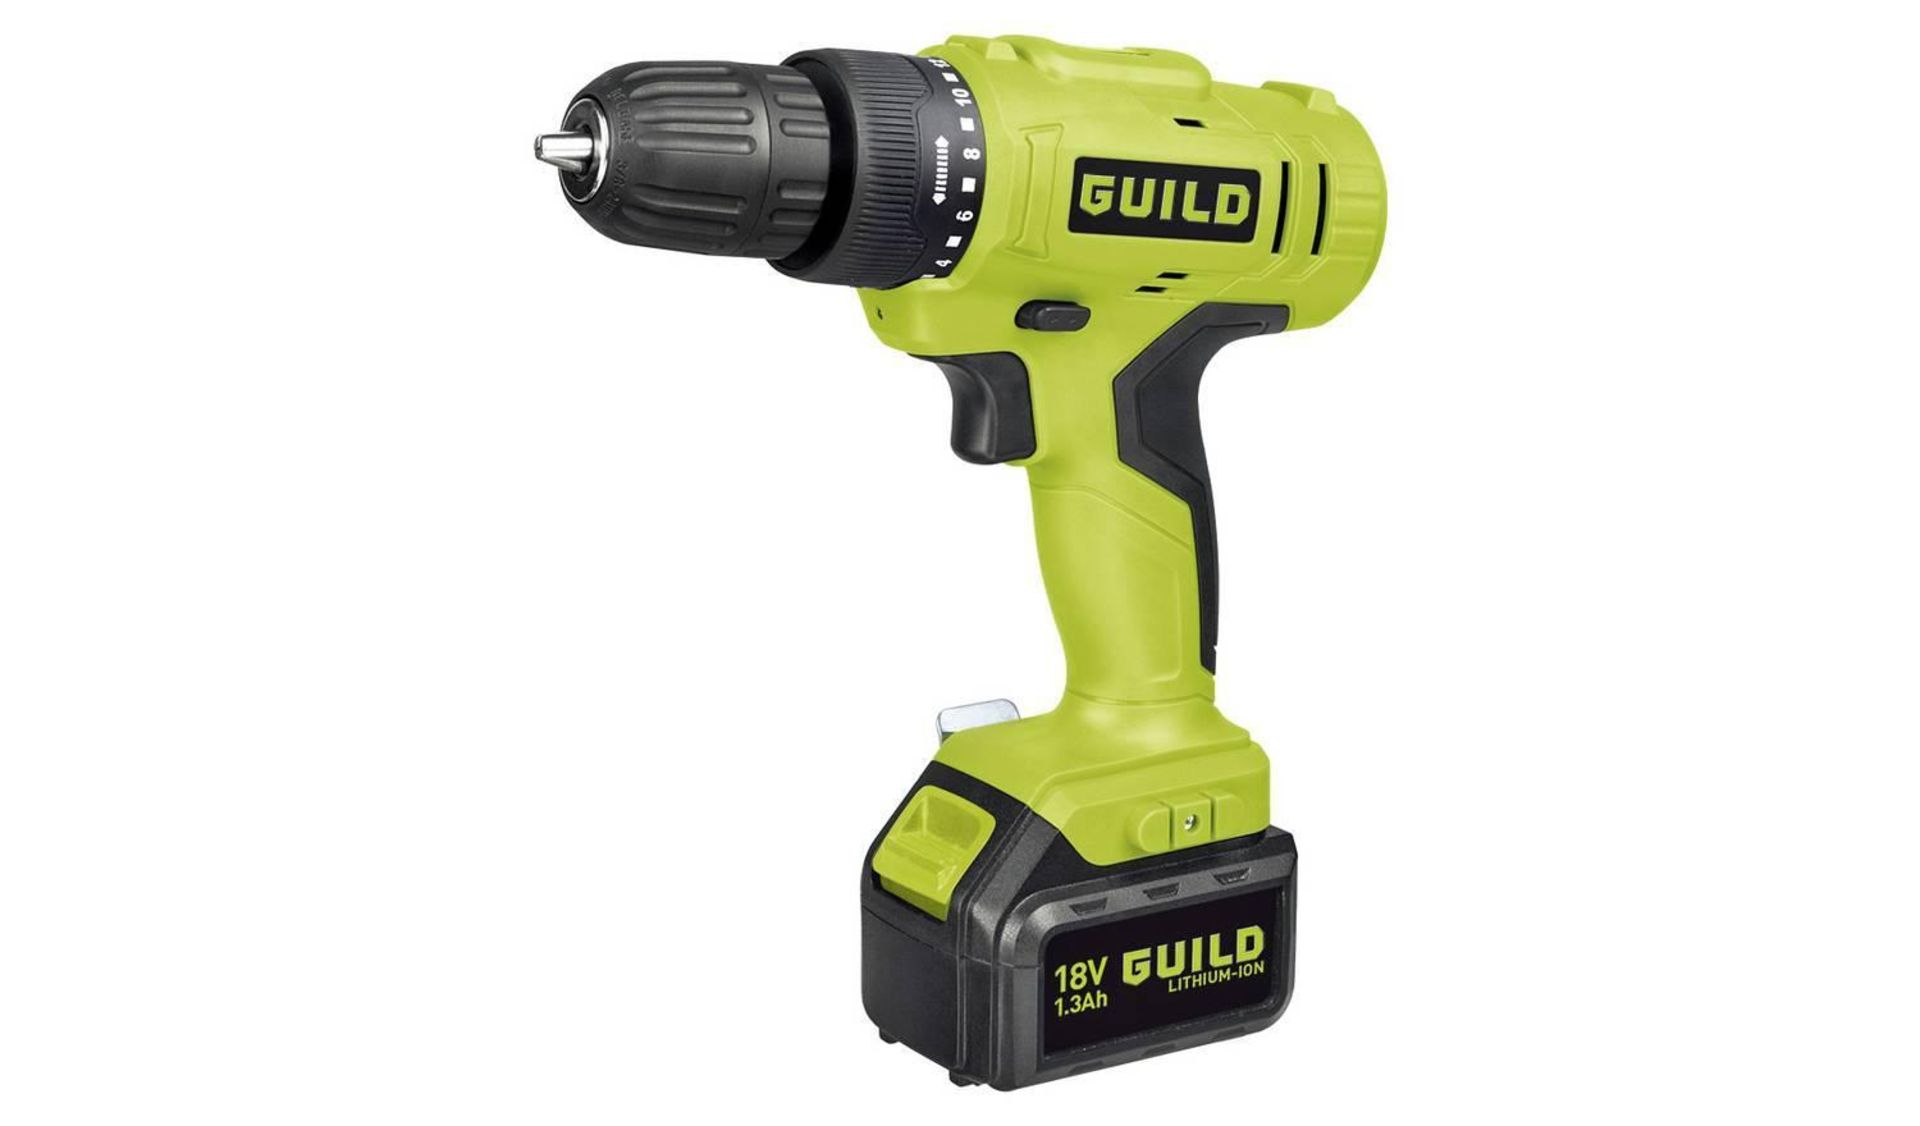 Guild 1.3AH Cordless Drill Driver - 18V, £40.00 RRP - Image 6 of 6